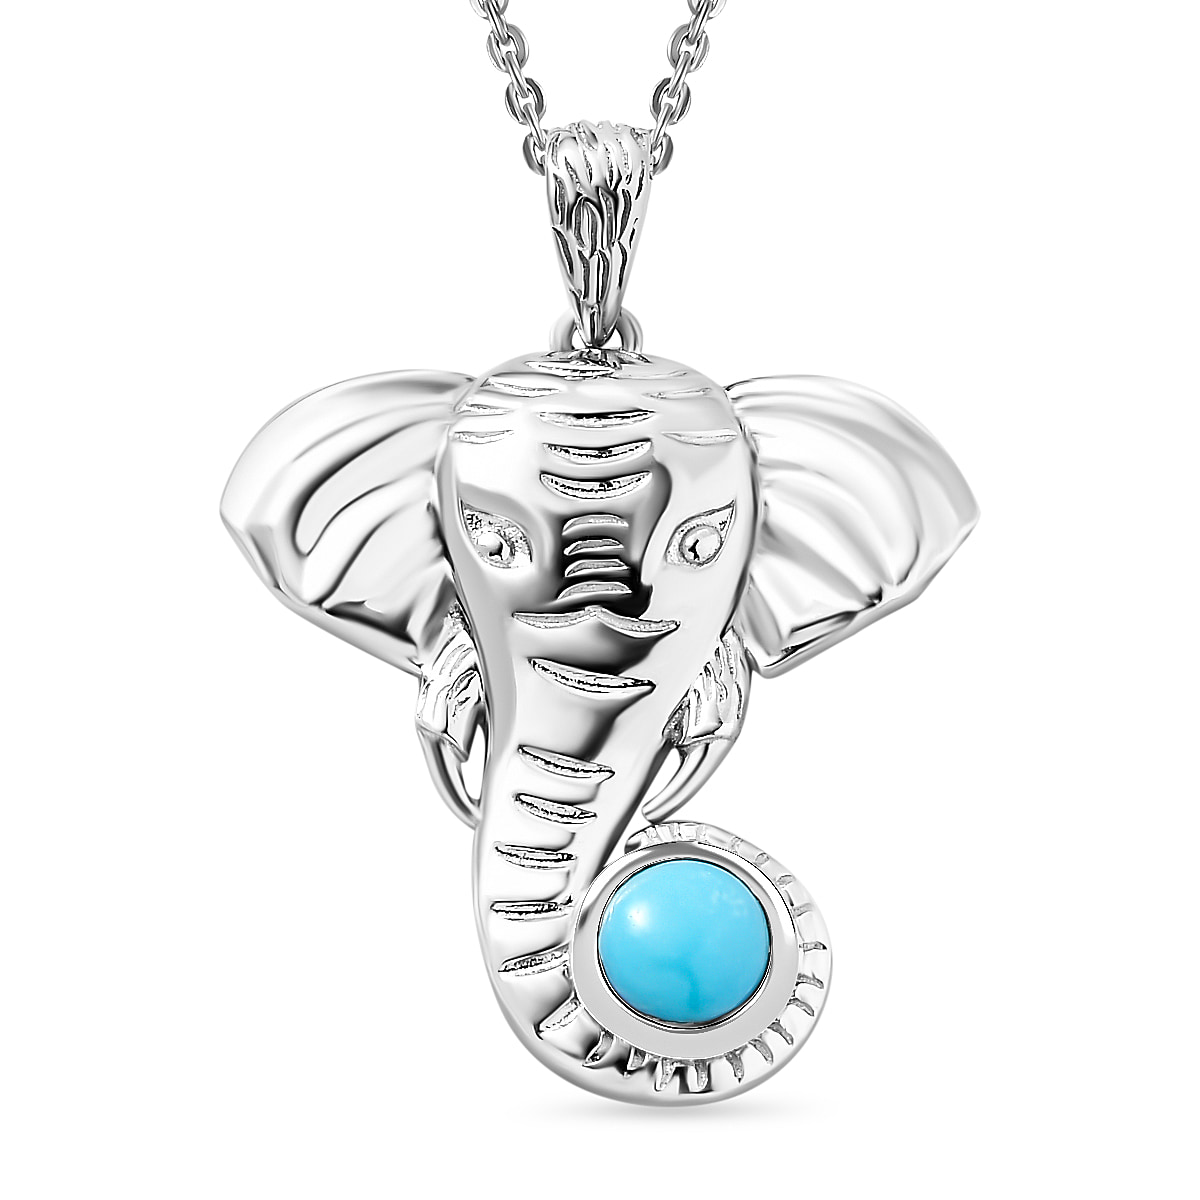 Arizona Sleeping Beauty Turquoise Elephant Head & Trunk Pendant with Chain (Size 20) in Platinum Overlay Sterling Silver 1.60 Ct, Silver Wt. 8.4 Gms